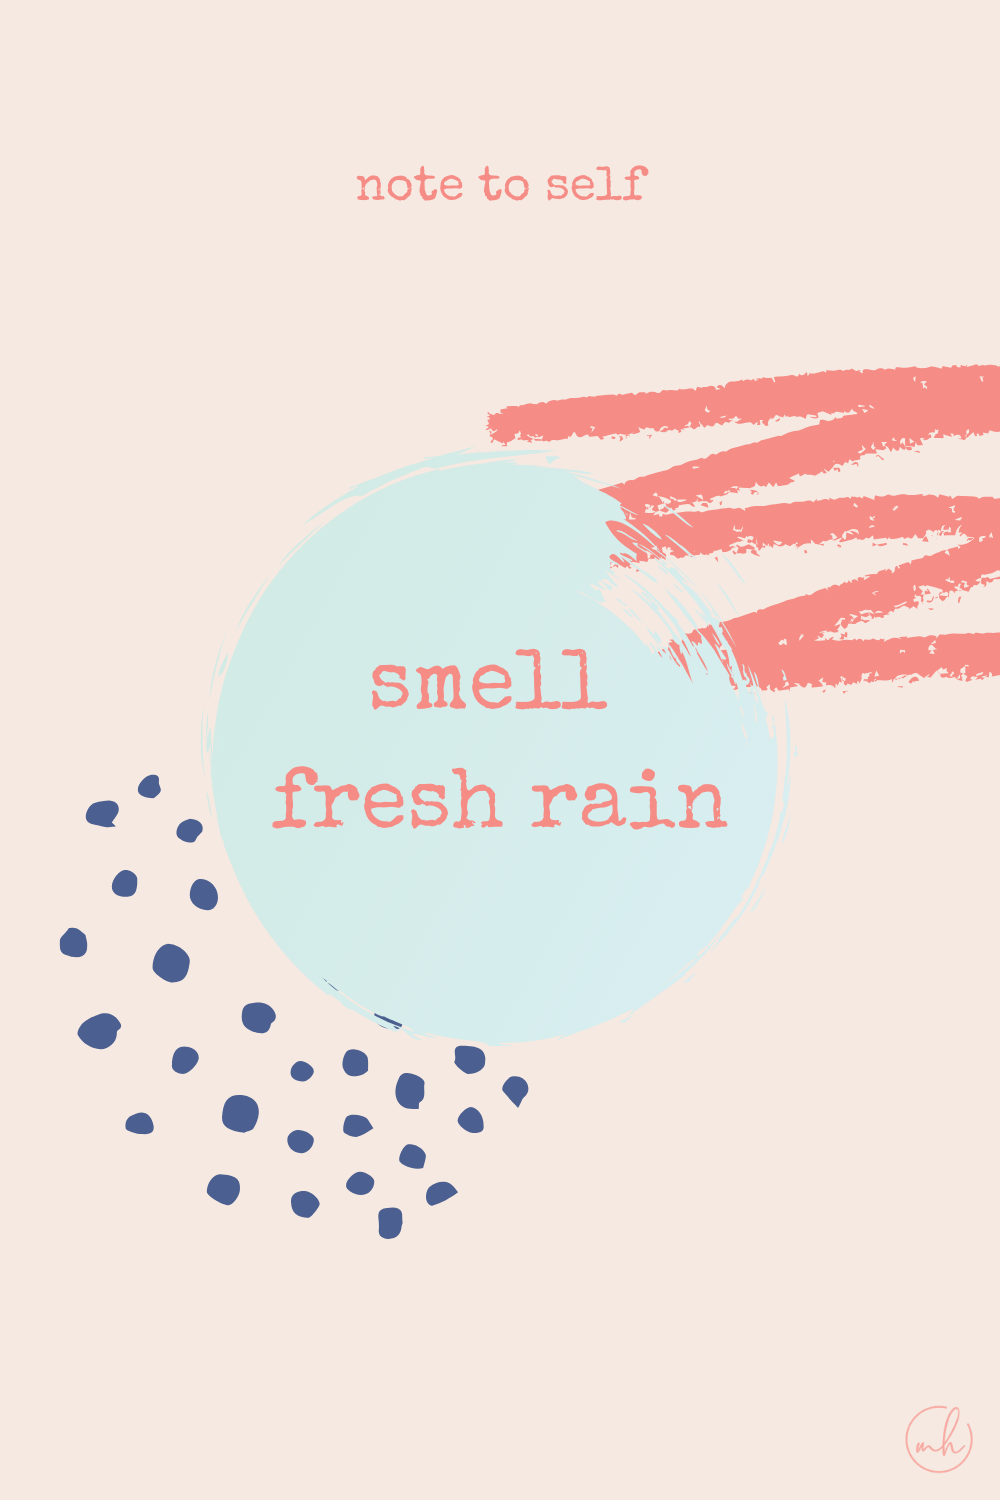 Smell fresh rain - Note to self quotes | myhoogah